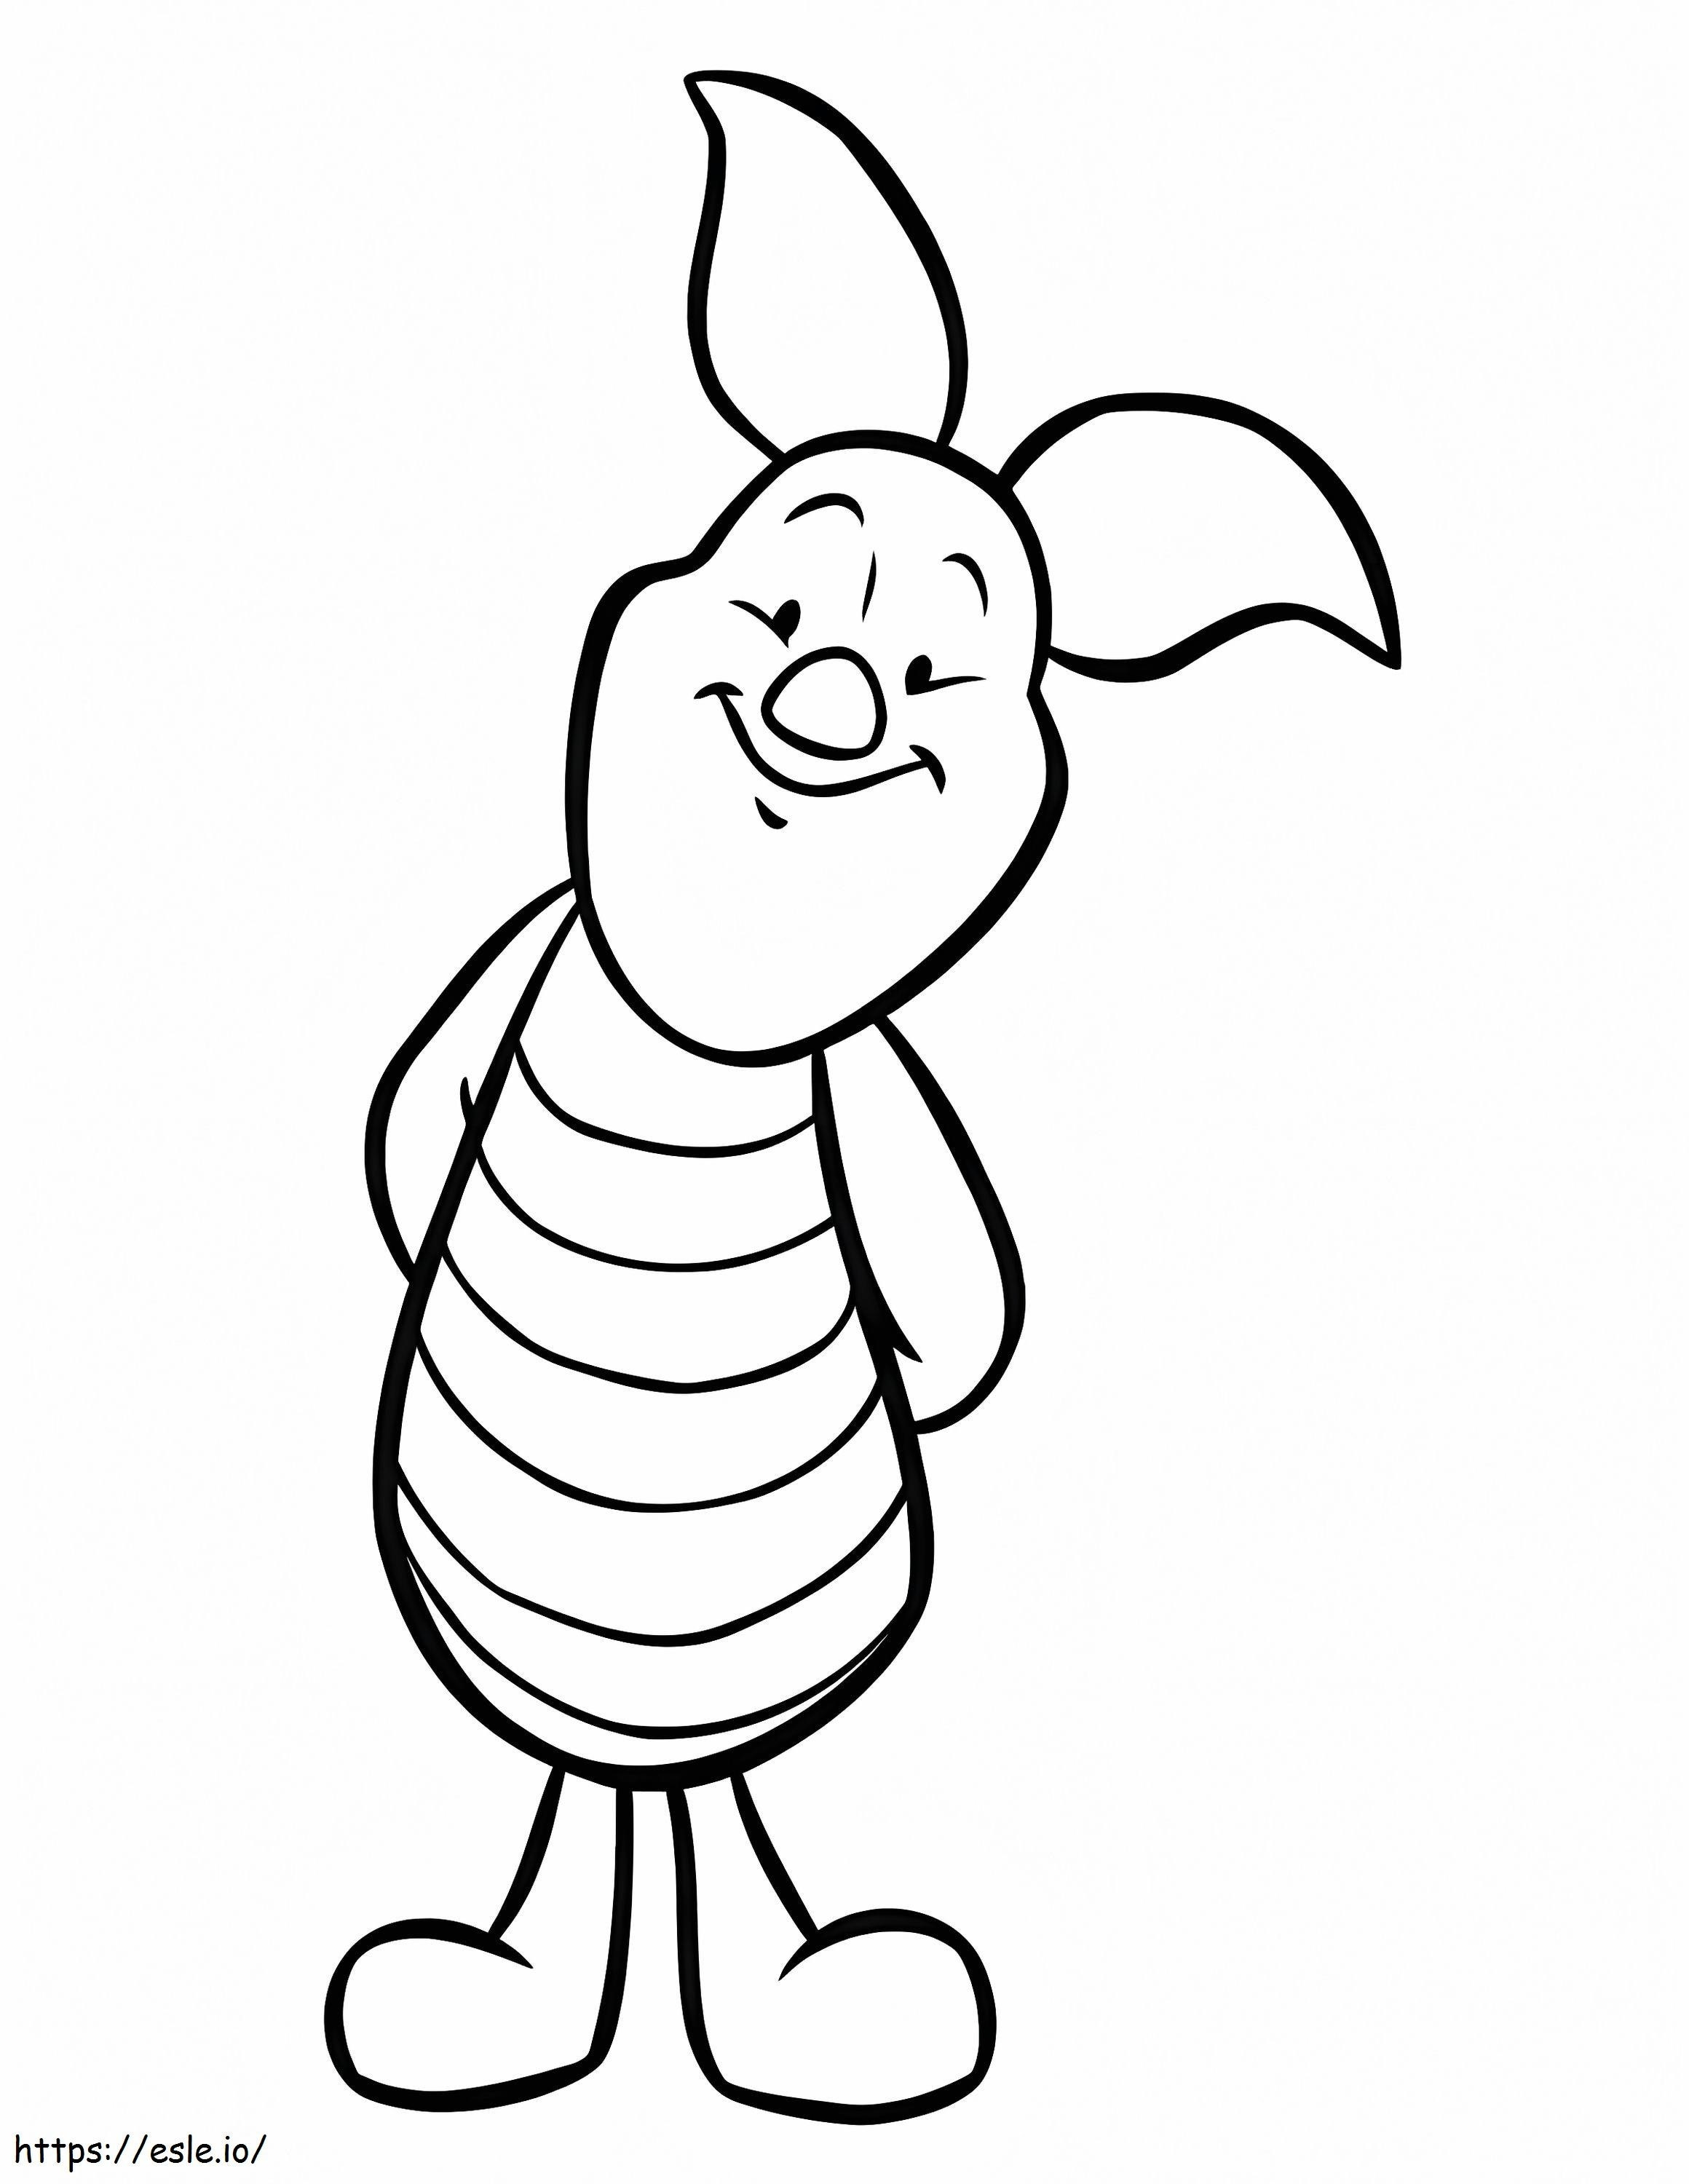 Piglet Smiling coloring page